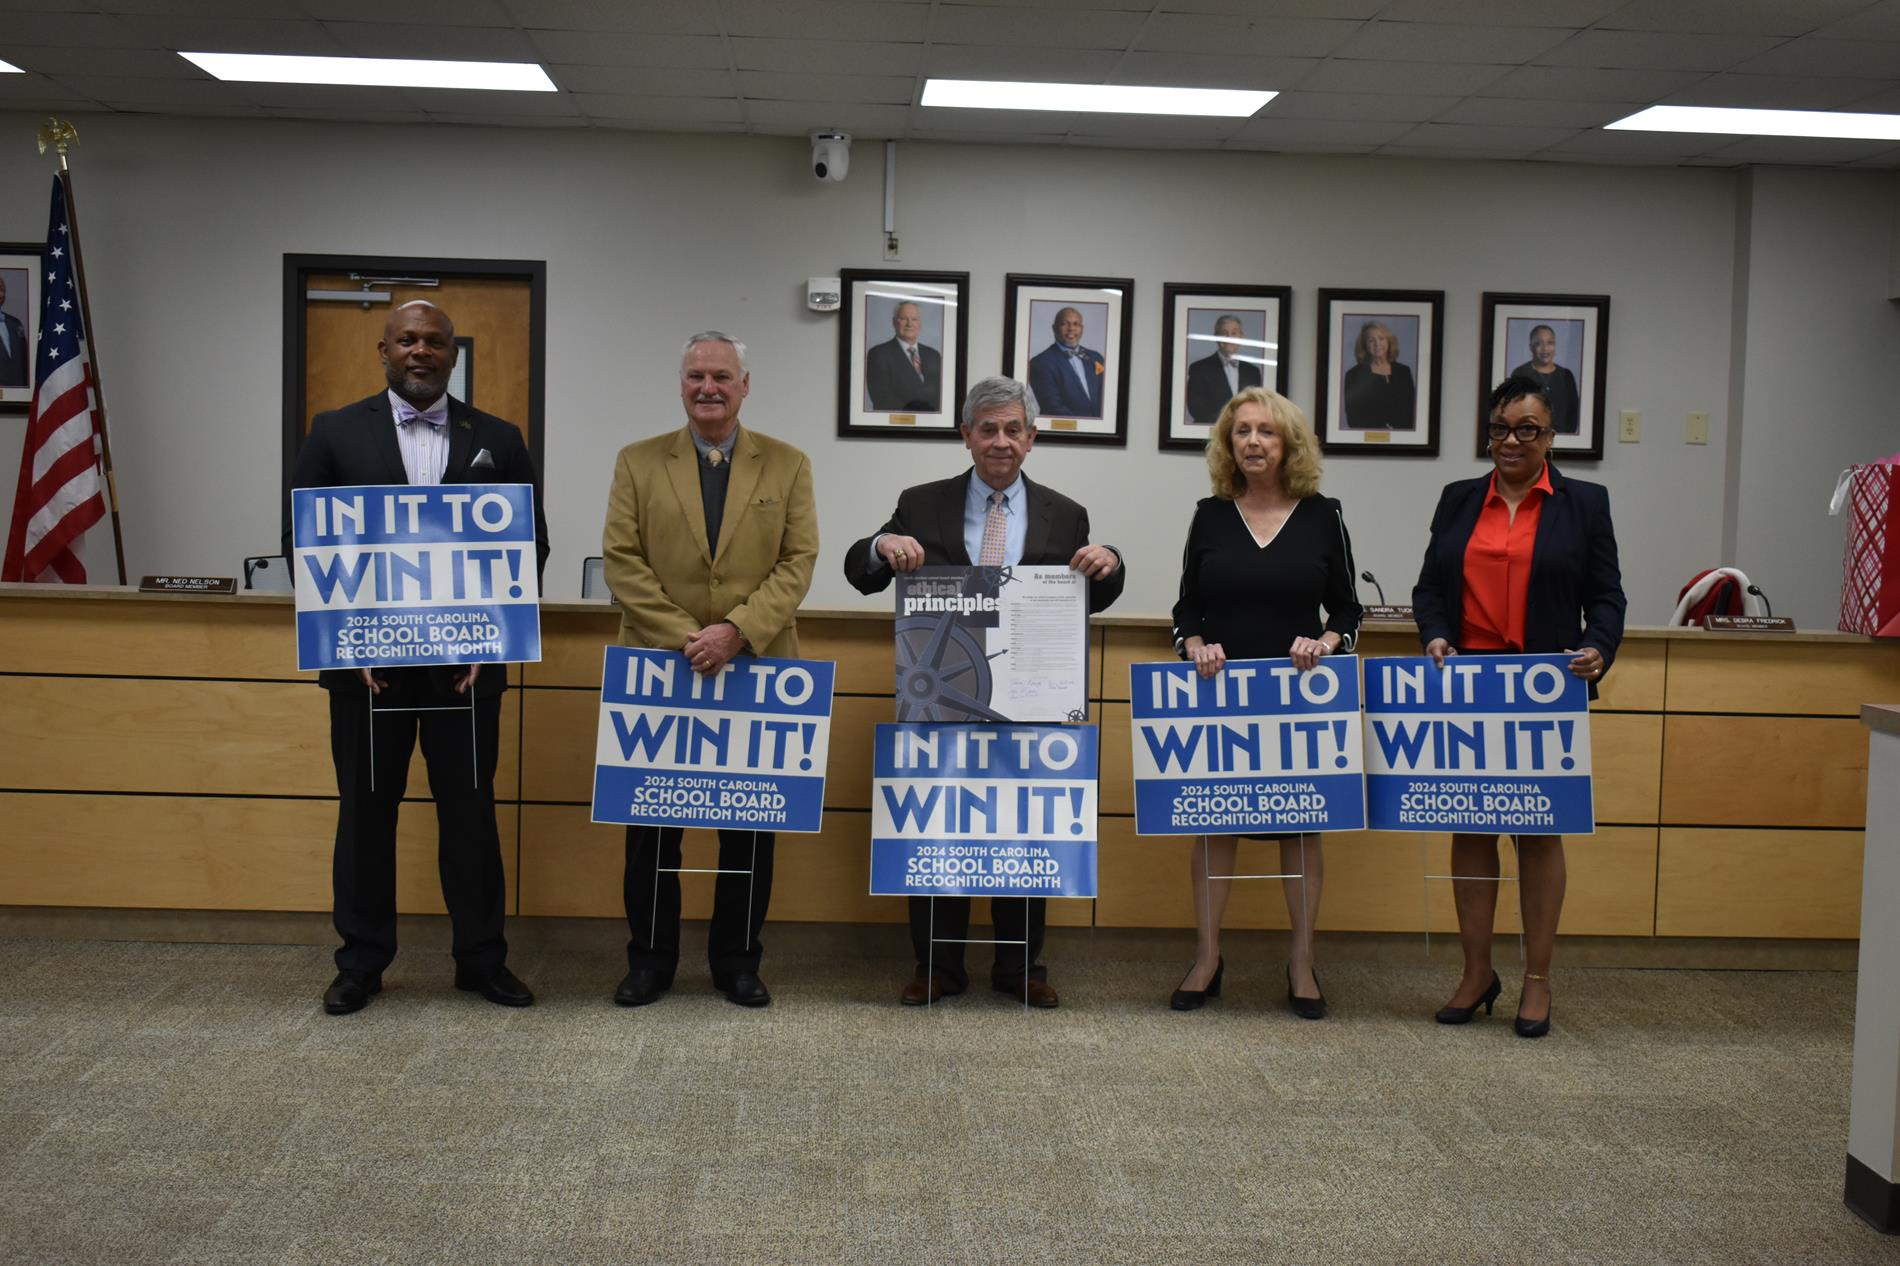 Board Members with Ethics Agreement and Yard Signs for the Board Members "In it to Win it"